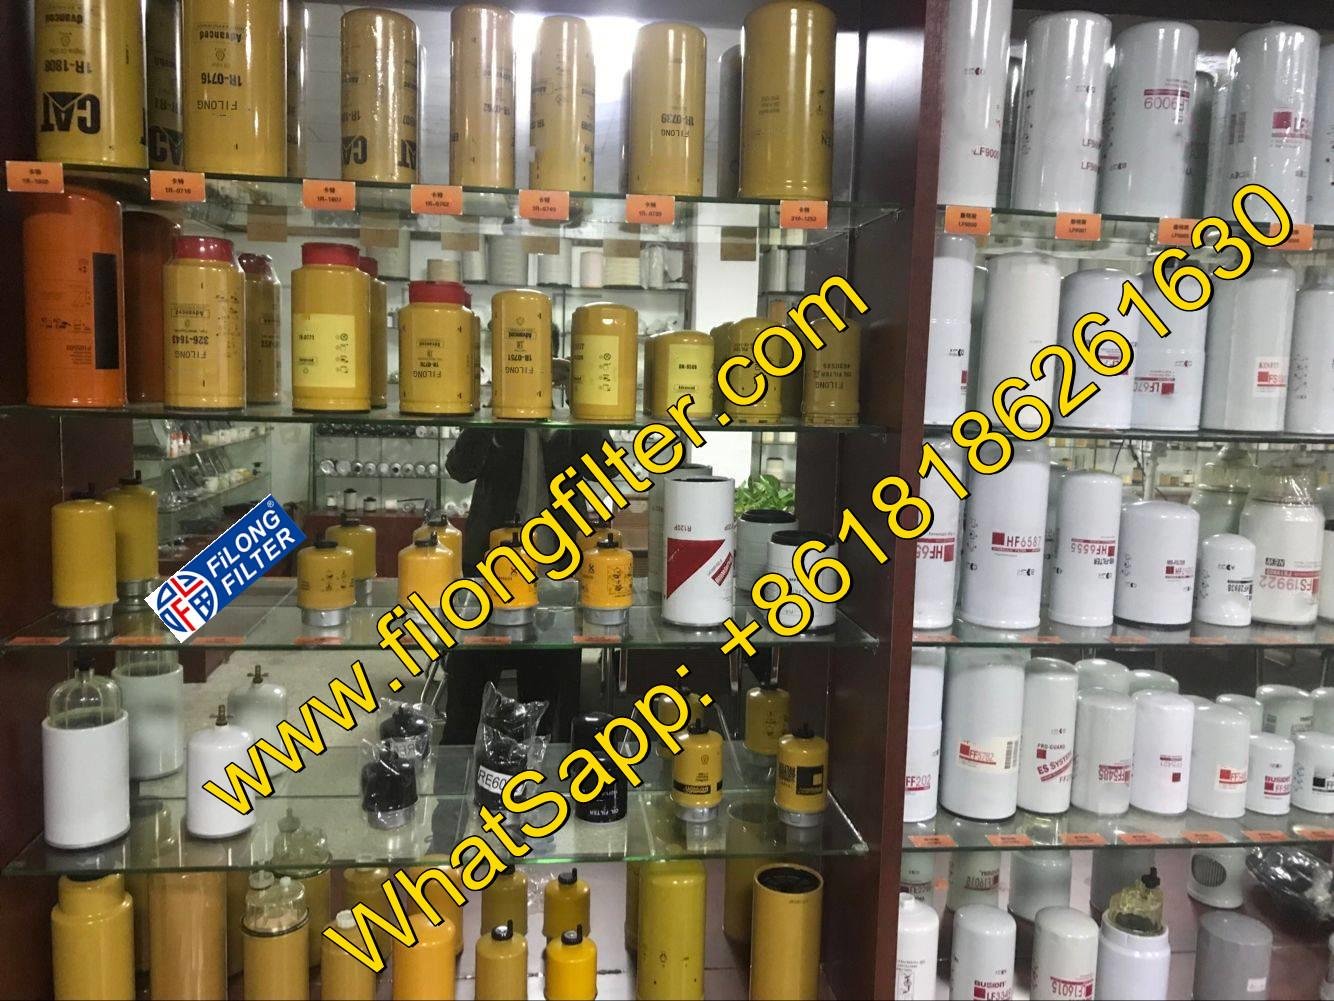   1、Fuel Filter: FFH-90095,23304-78260, 2330478260;  OEM Number:  HINO	23304-78260,2330478260 Reference Number:  FILONG	 FFH90095  Description and application:  FOR HINO DUTRO 2018 TKG-XZU655M;    2、Oil Filter: FOH-90044,15601-78140， 1560178140;  OEM Number:  TOYOTA	15601-78140， 1560178140 HINO	15601-78140， 1560178140 Reference Number:  FILONG	FOH90044 Description and application:  HINO DUTRO 2018 TKG-XZU655M; TOYOTA COASTER 2#G-XZB60 70 80 N04C(T) 19/8-;   3、 Fuel Filter:  FFH-90069,23304-78500, 2330478500,23304-EV570,23304-EV570;  OEM Number:  HINO	23304-78500, 2330478500, 23304-EV570, 23304EV570 Reference Number:  FILONG Filter	FFH90069 Sakura Filter	EF-13180 Description and application:  HINO DUTRO TKG-XZU655M 2018; HINO 300 Series;